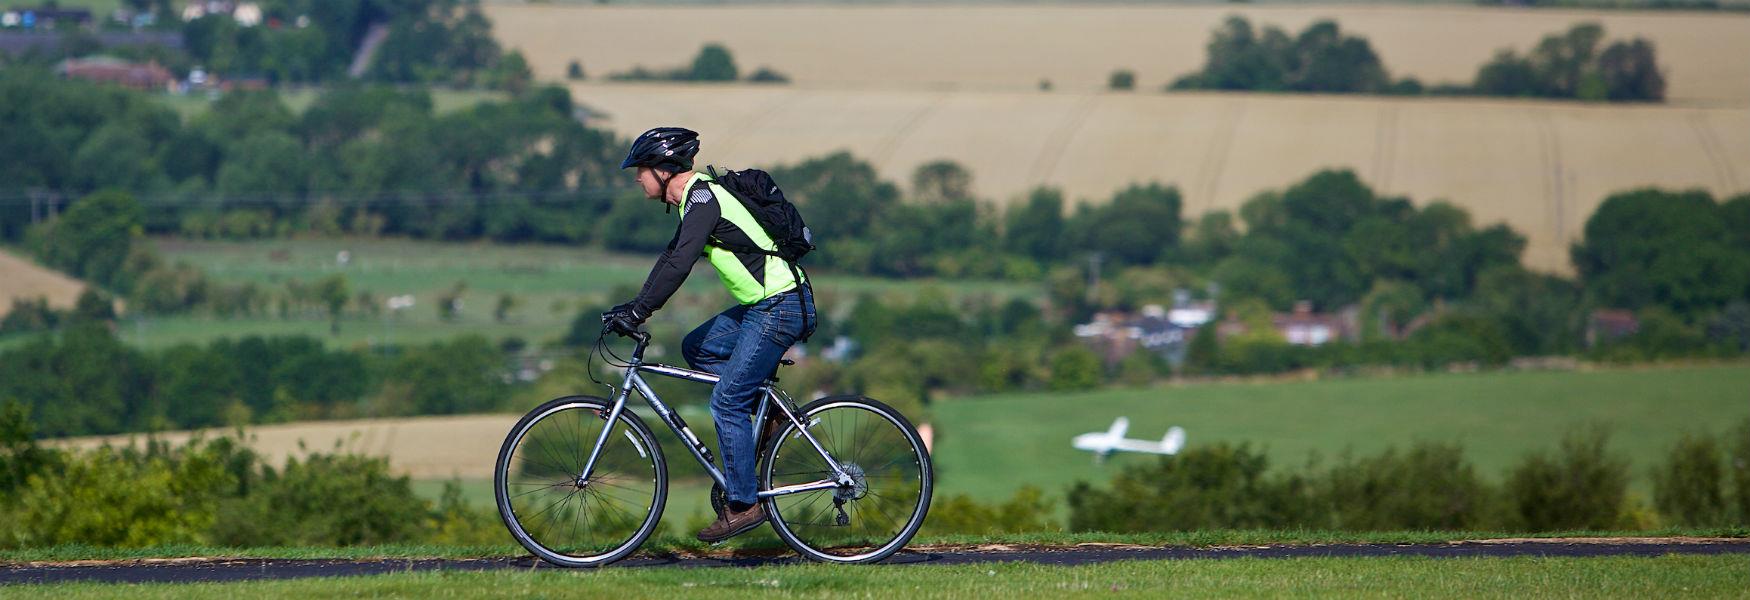 Cycling in Bedfordshire